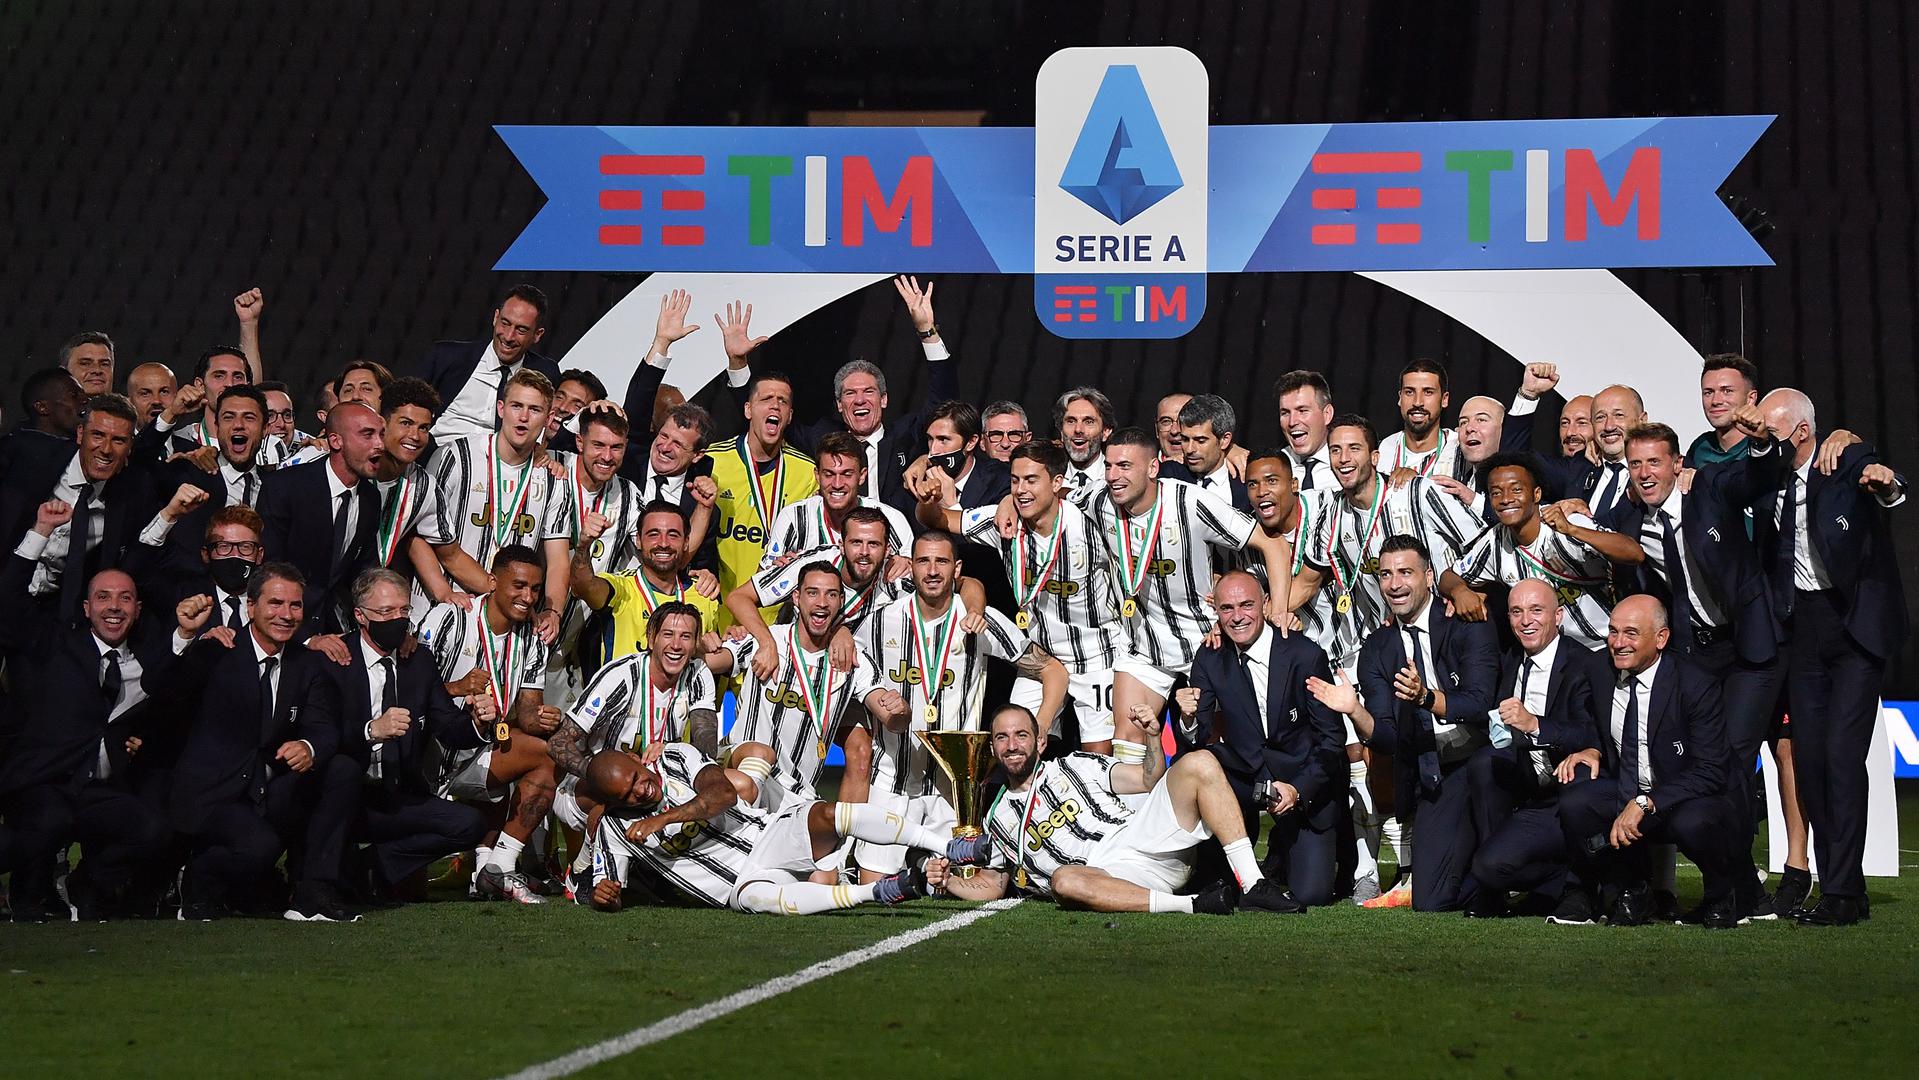 Juventus is the most successful team in Italy having won the most league titles (36) | SportzPoint